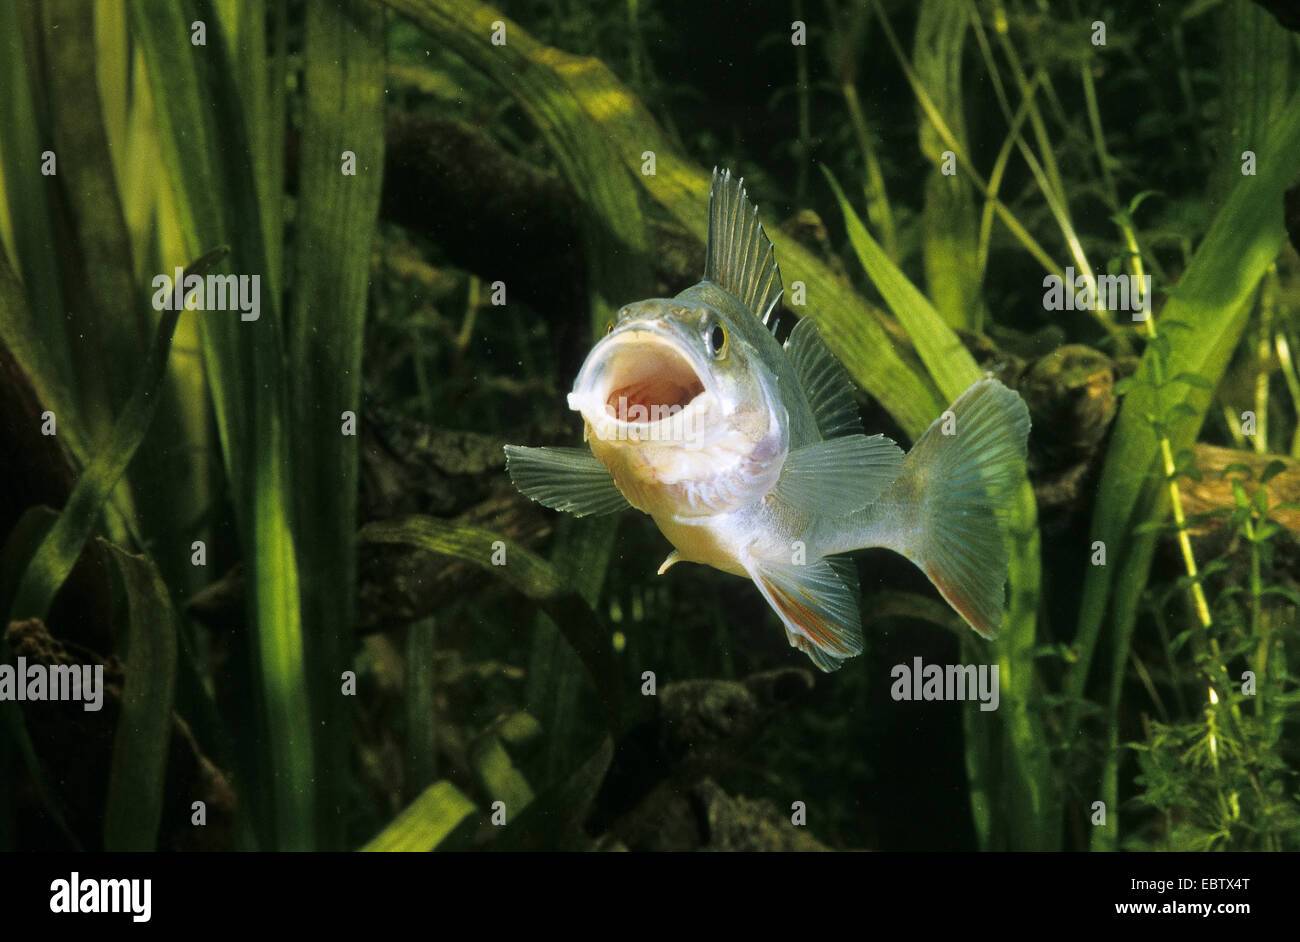 Perch, European perch, Redfin perch (Perca fluviatilis), with opened mouth, Germany Stock Photo